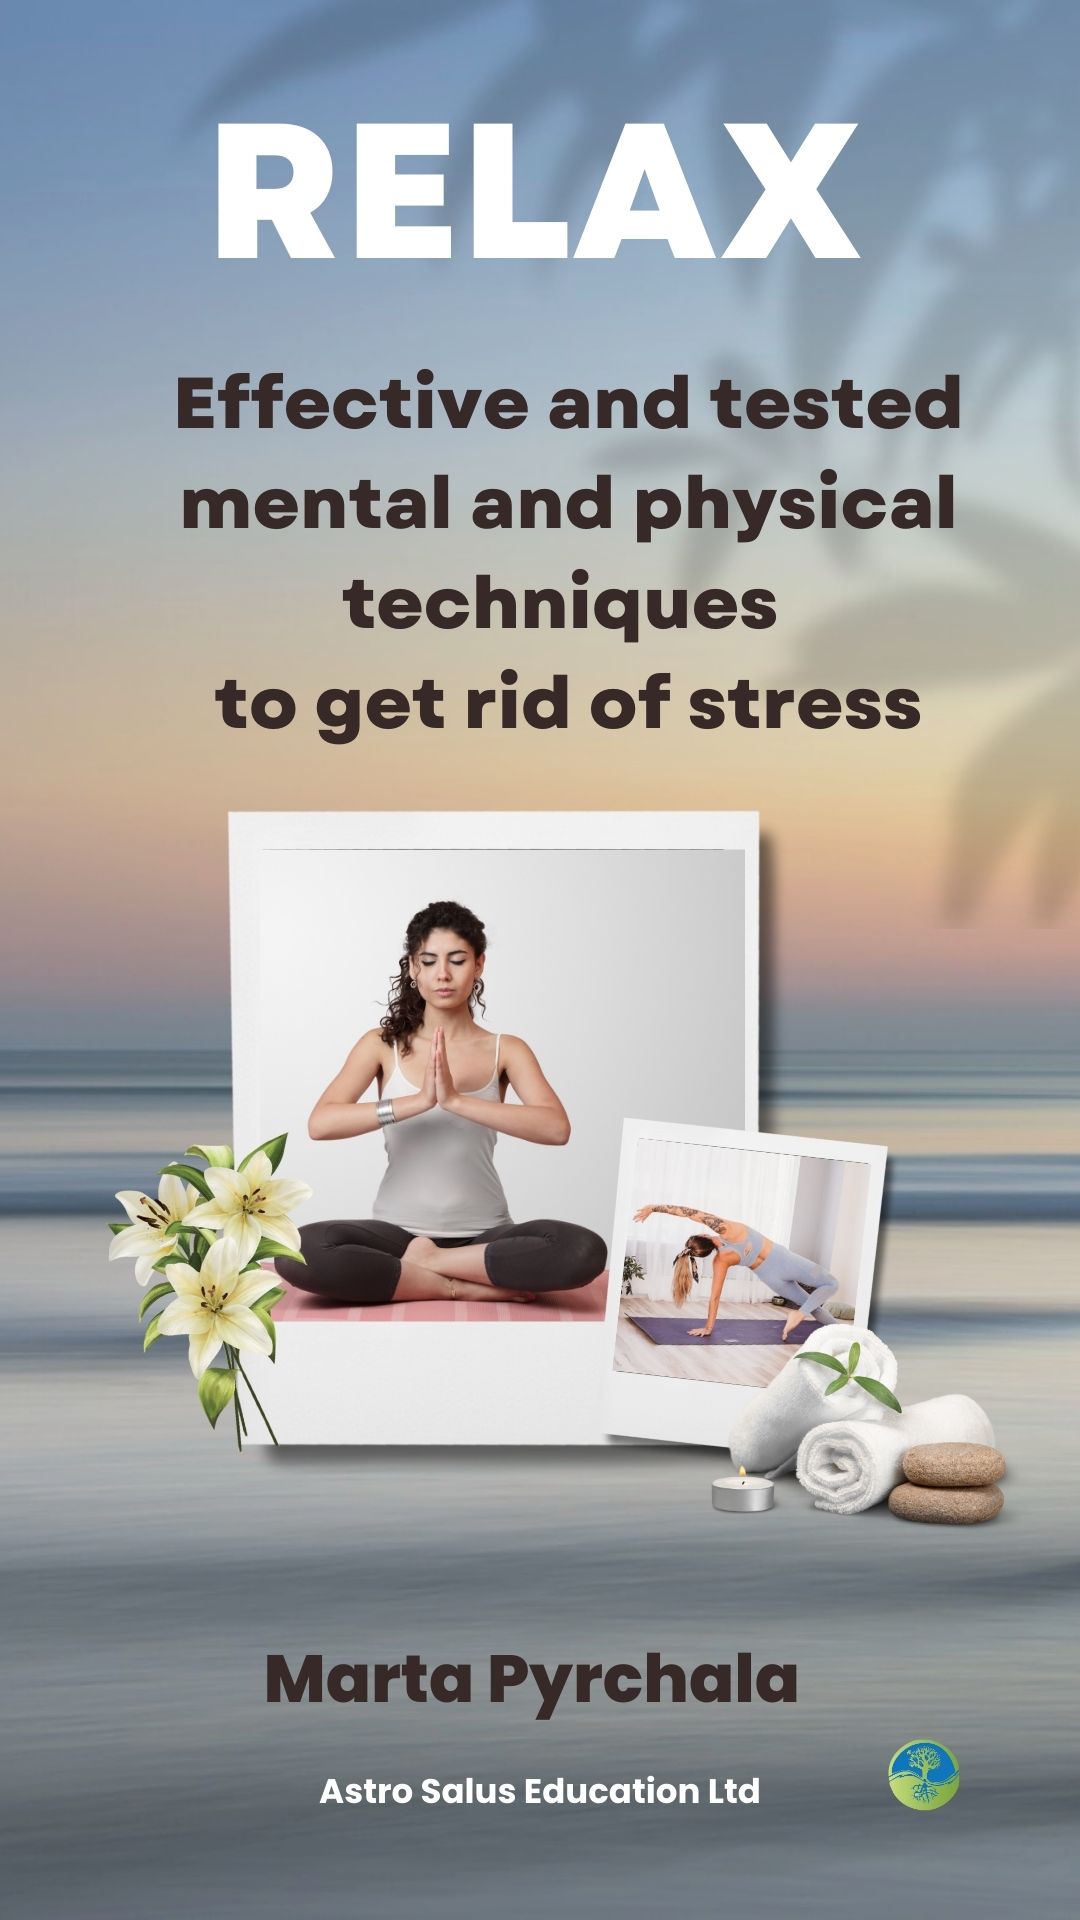 Relax. Effective and tested mental and physical techniques to get rid of stress